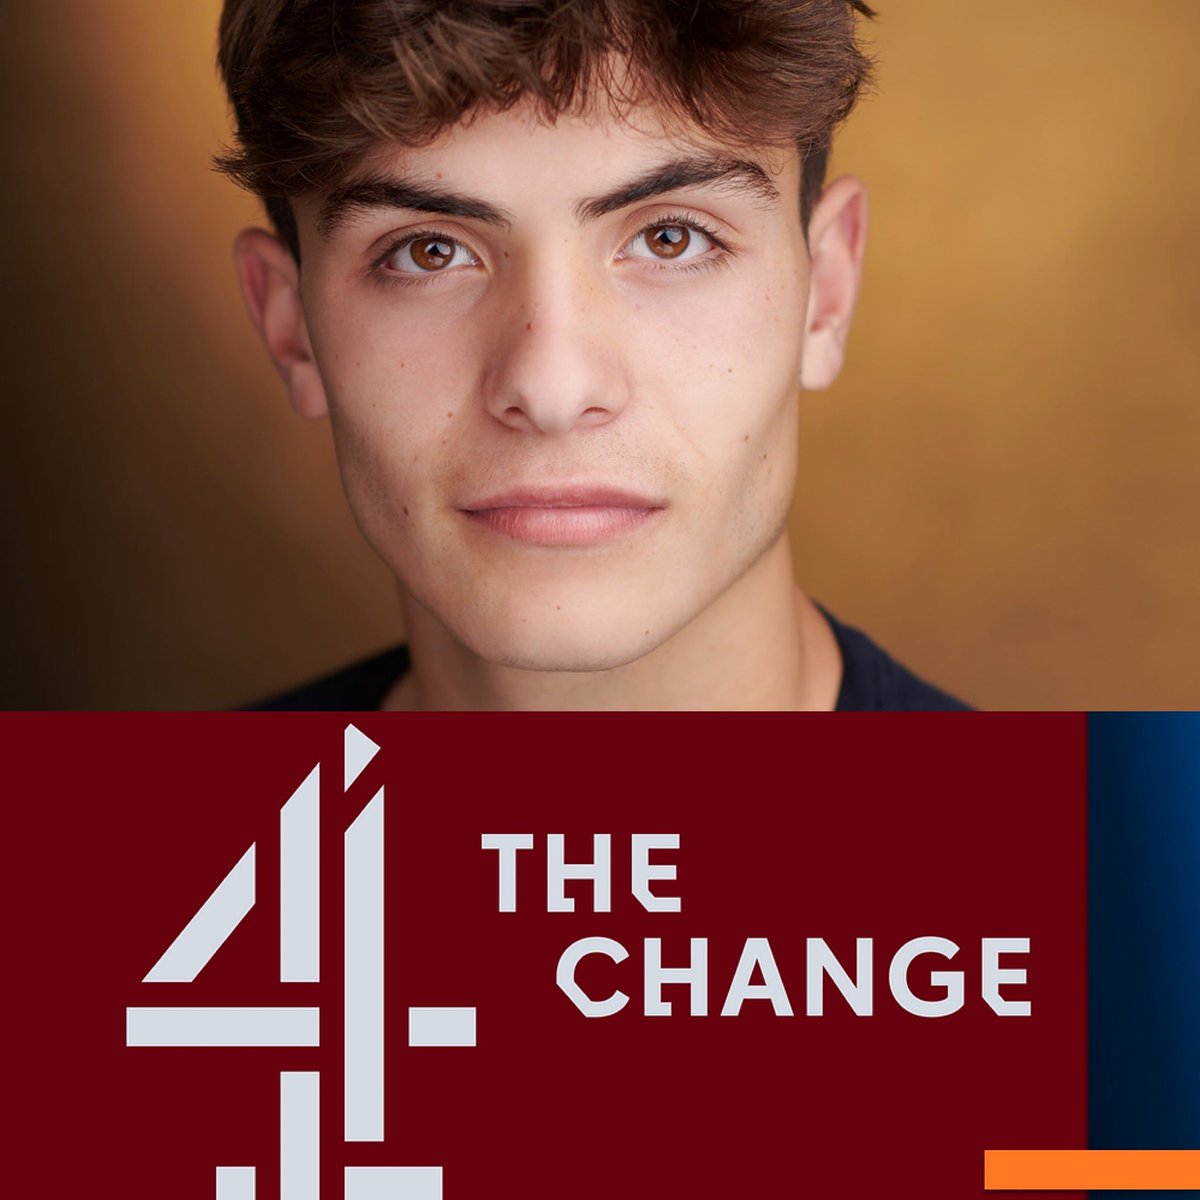 Channel 4’s THE CHANGE, featuring Young Actor, JUDE, as Jack, comes to our screens on June 21st. Exciting! #youngactor #teenactor #televisionactor #thechange #channel4